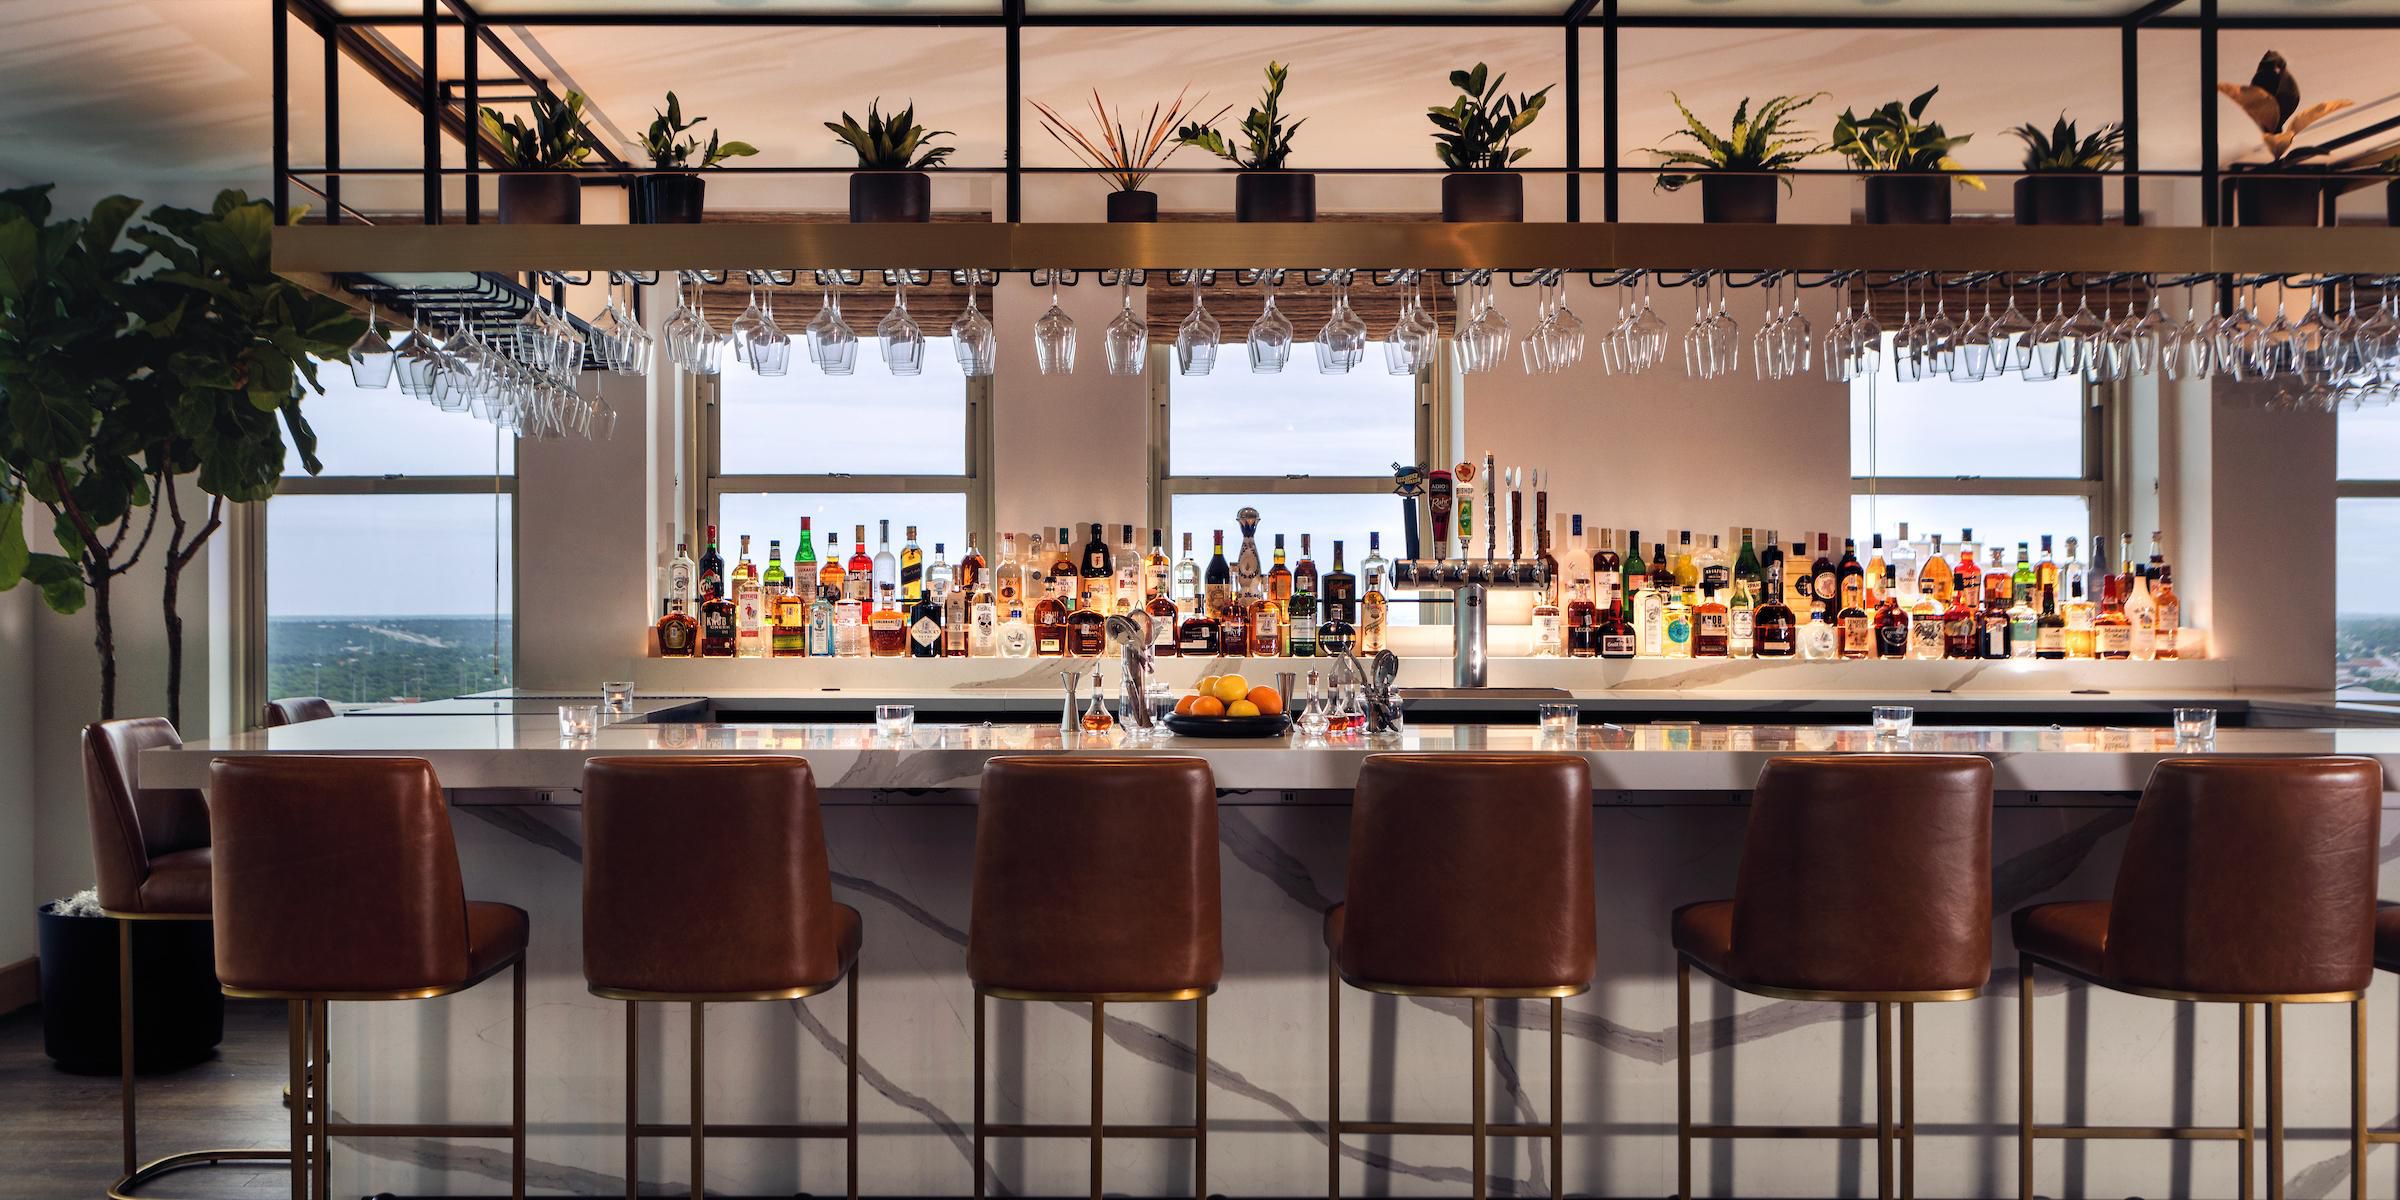 Saddle up for well-crafted cocktails with
imaginative flair at Refinery 714, our
penthouse lounge. Named for our
address—714 Main Street—the bar’s luxe
seating affords sweeping views of the Texas plains and downtown Fort Worth.